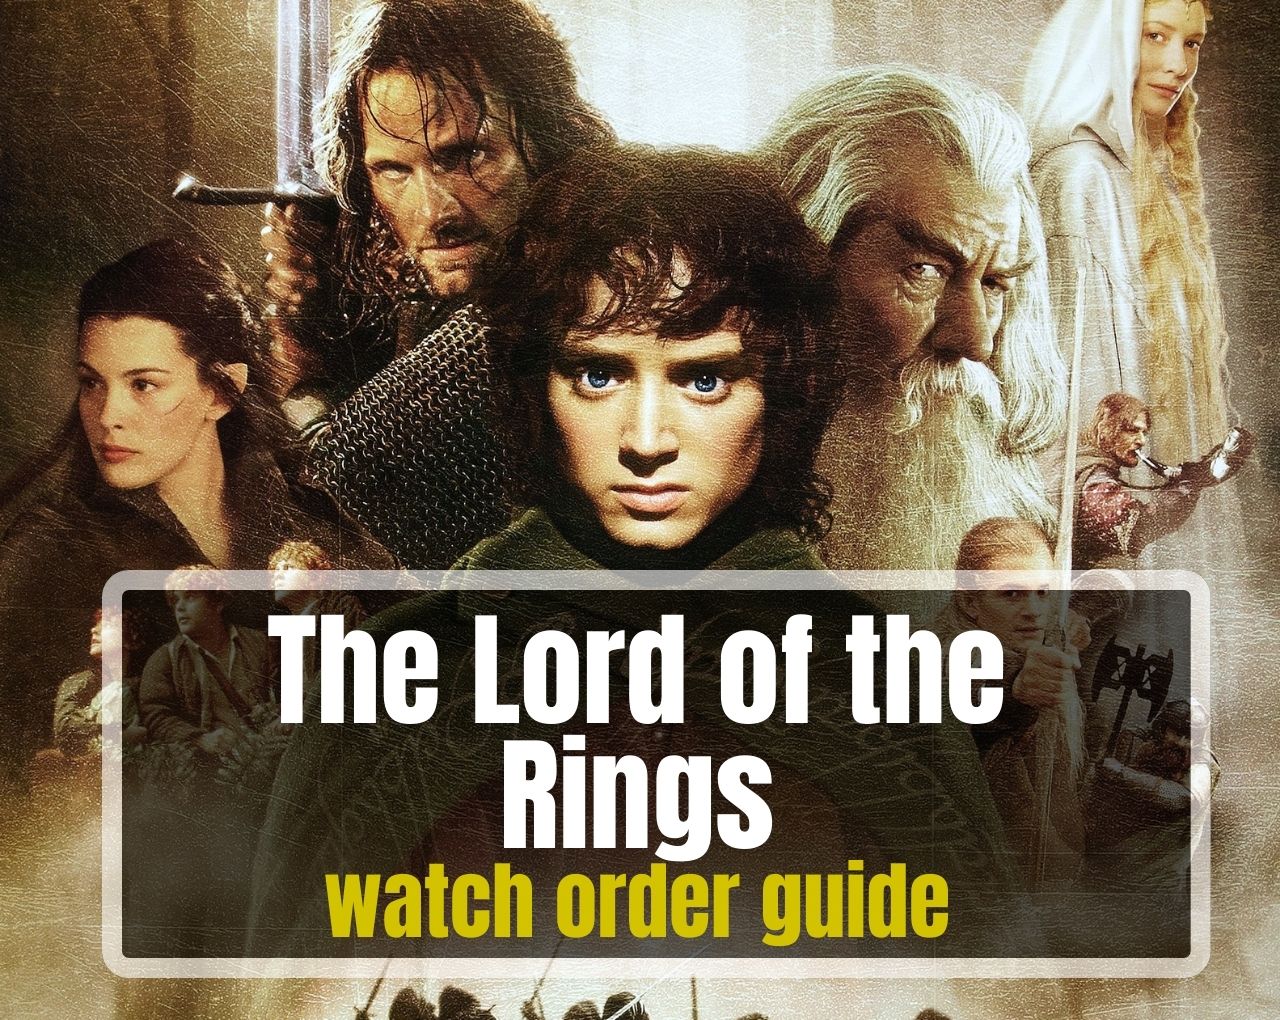 The Lord of the Rings watch order guide